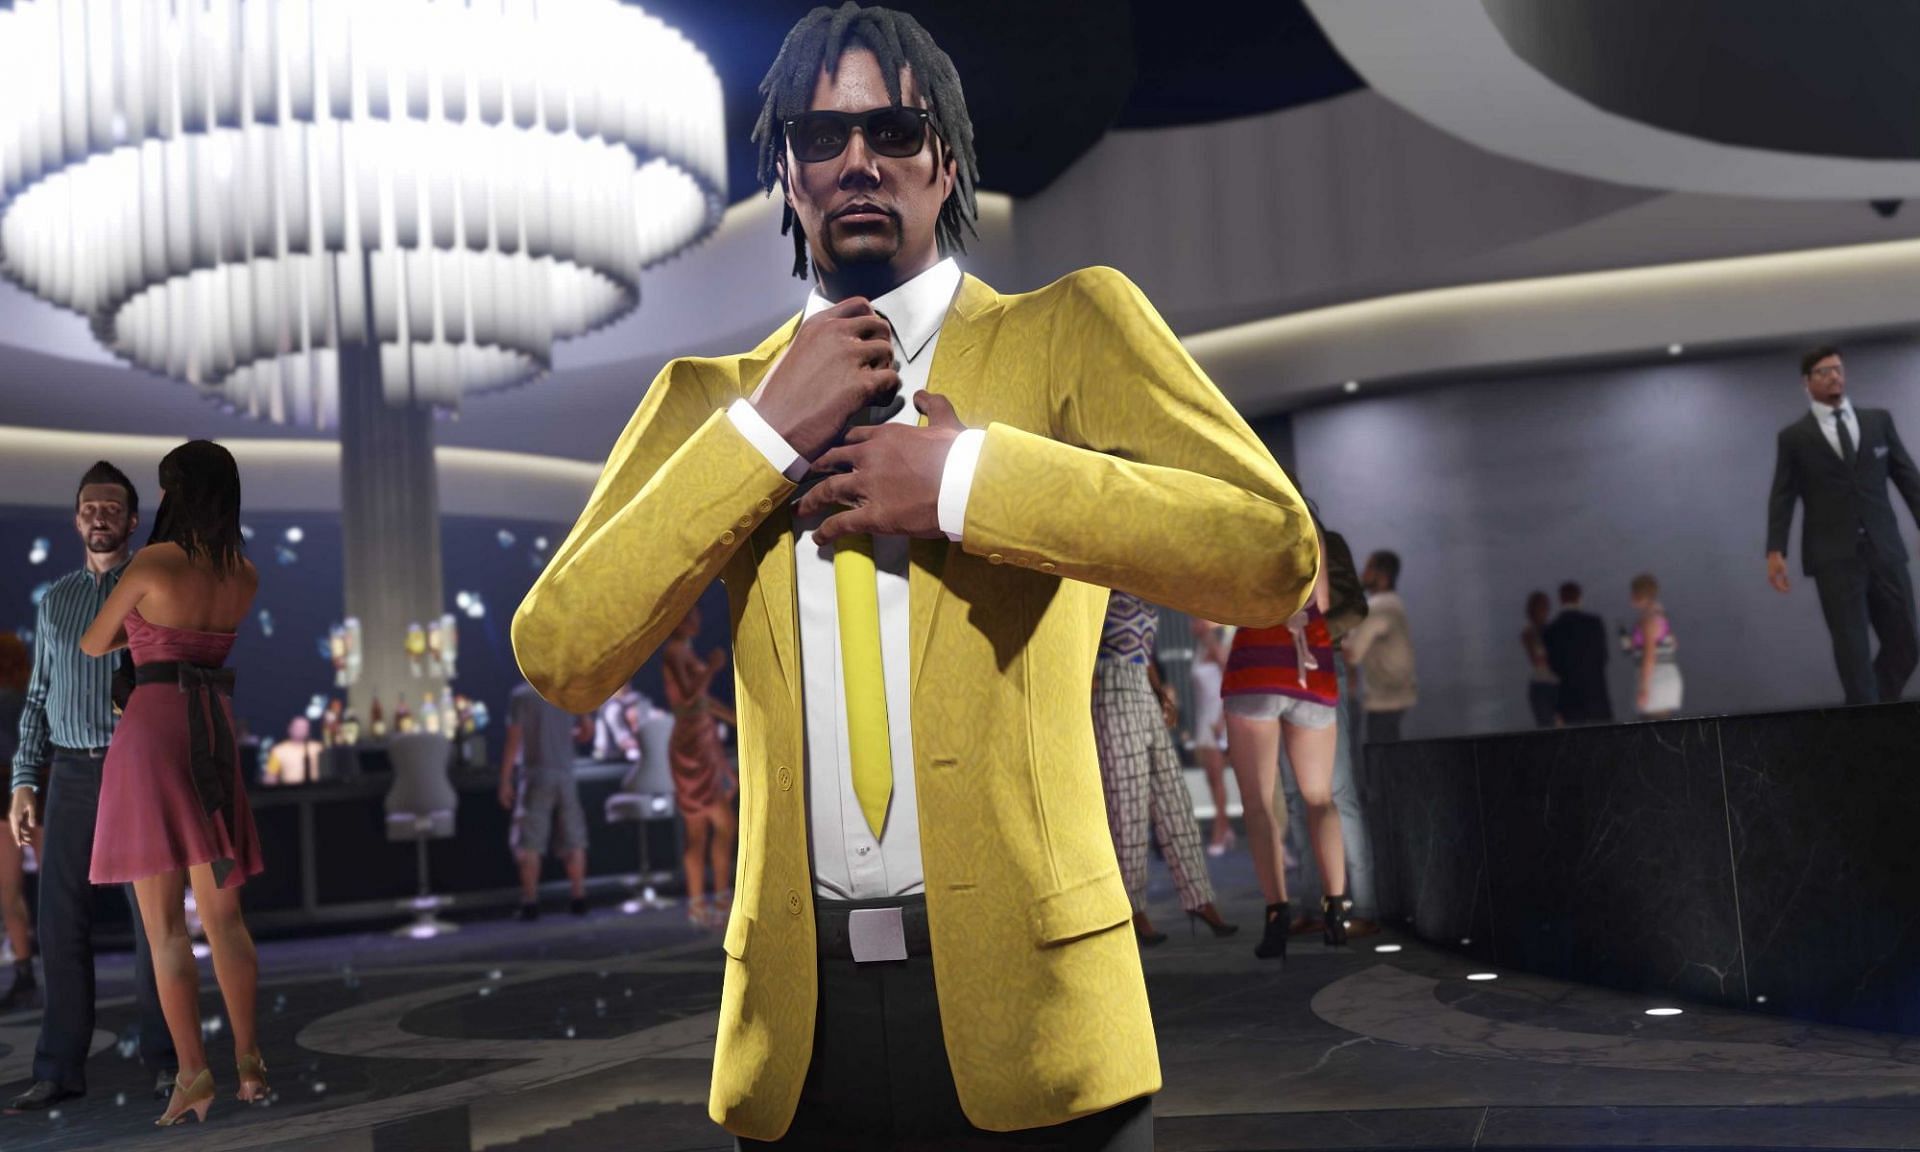 GTA Online Best Arcades Guide: Cost, Upgrades, Tips